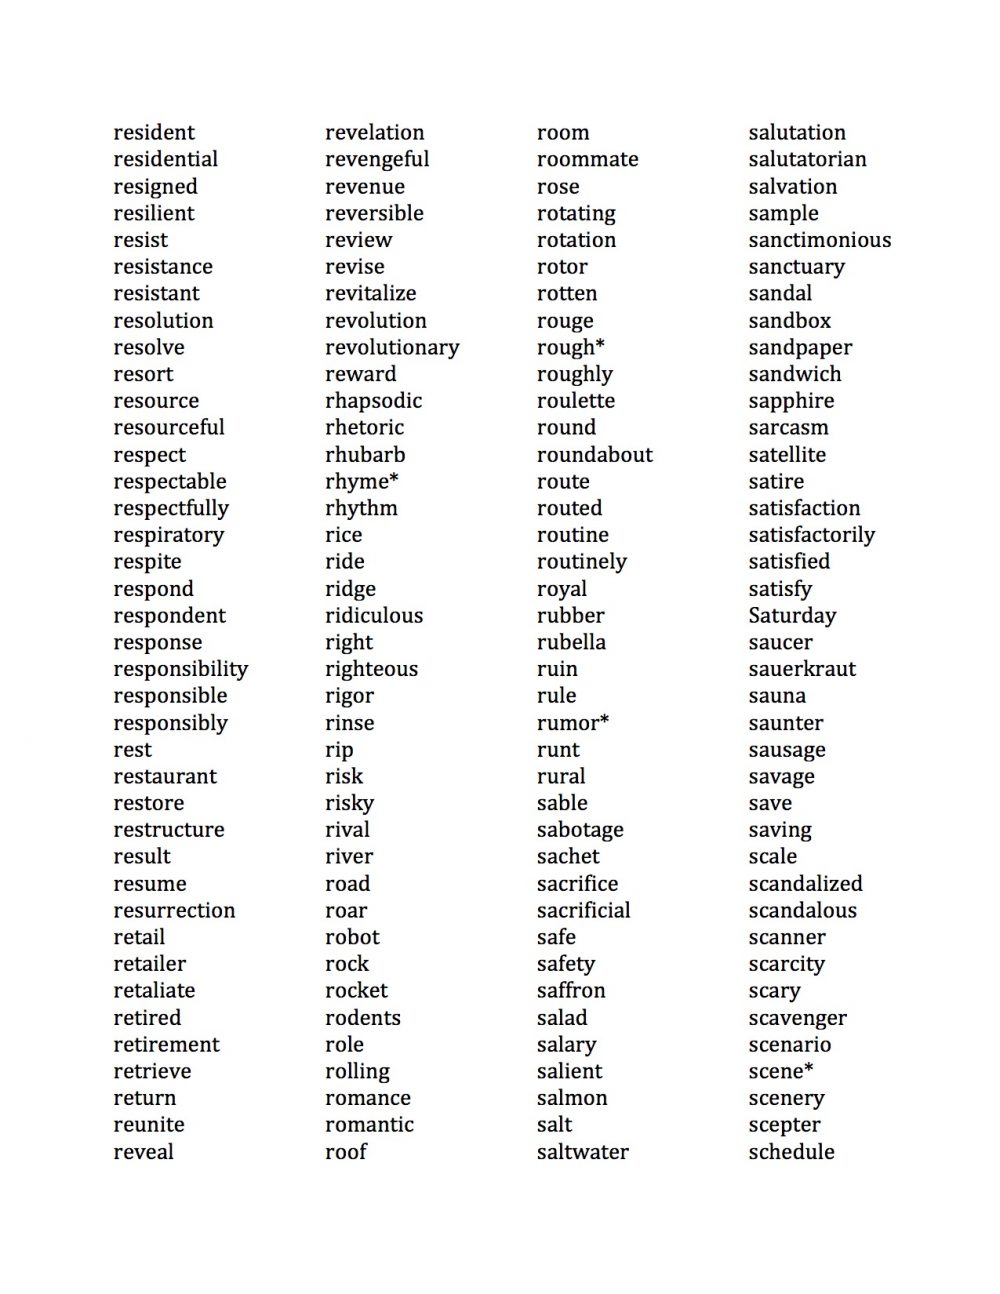 Spelling Bee Words - Recommended by Teachers